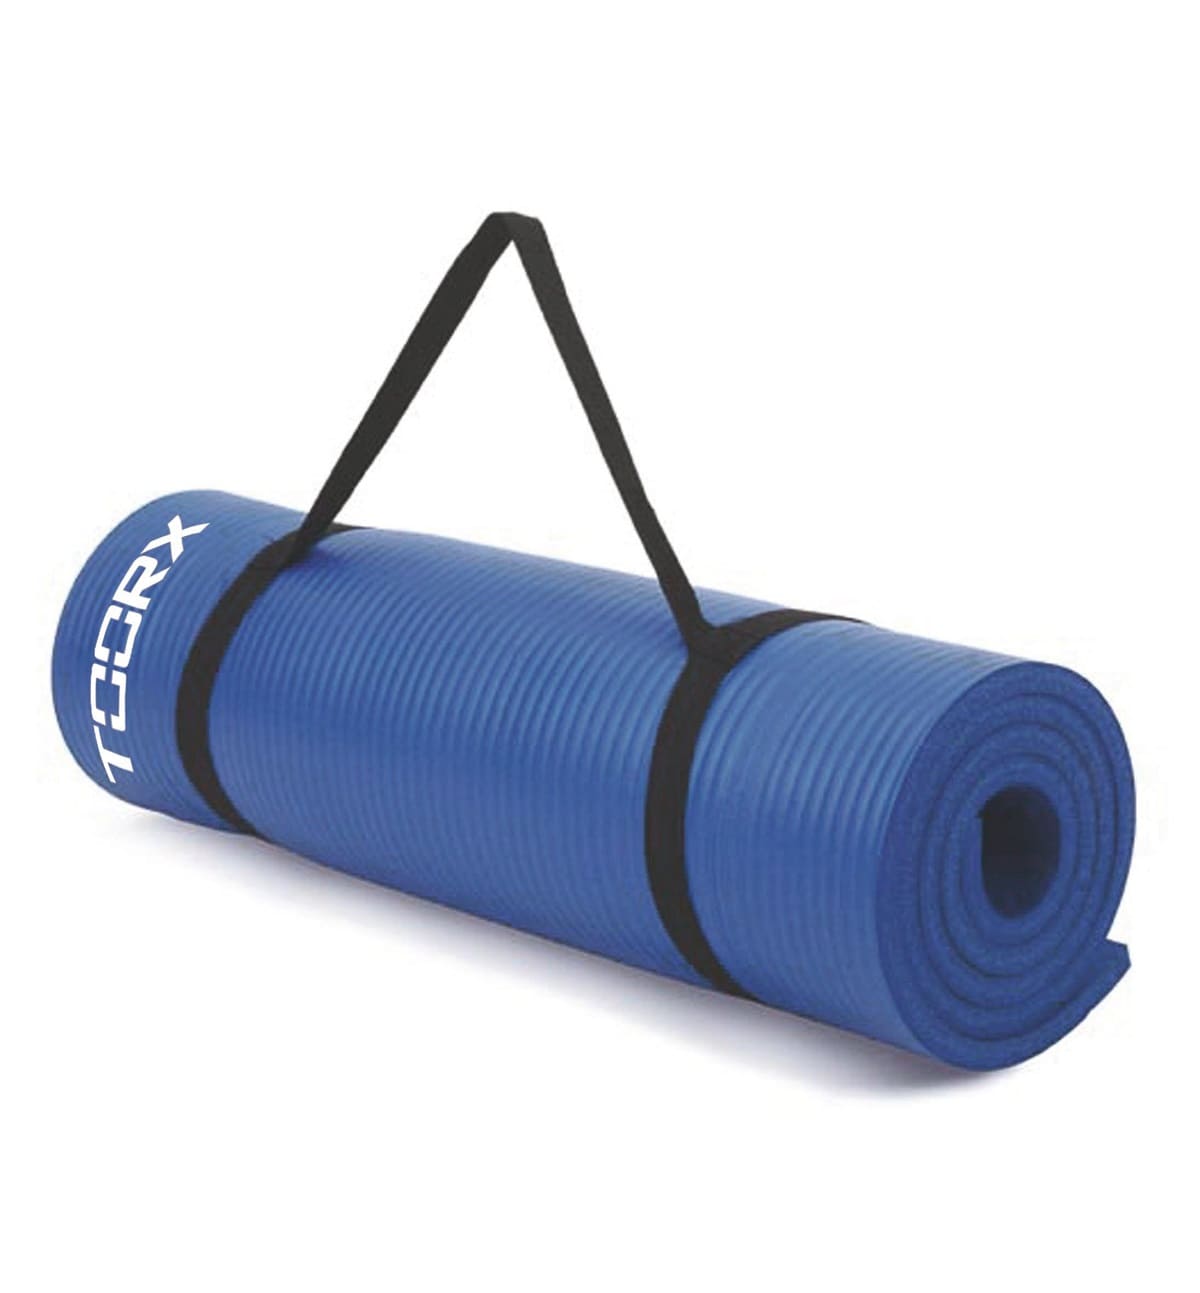 TOORX FITNESS MAT WITH CARRY HANDLE